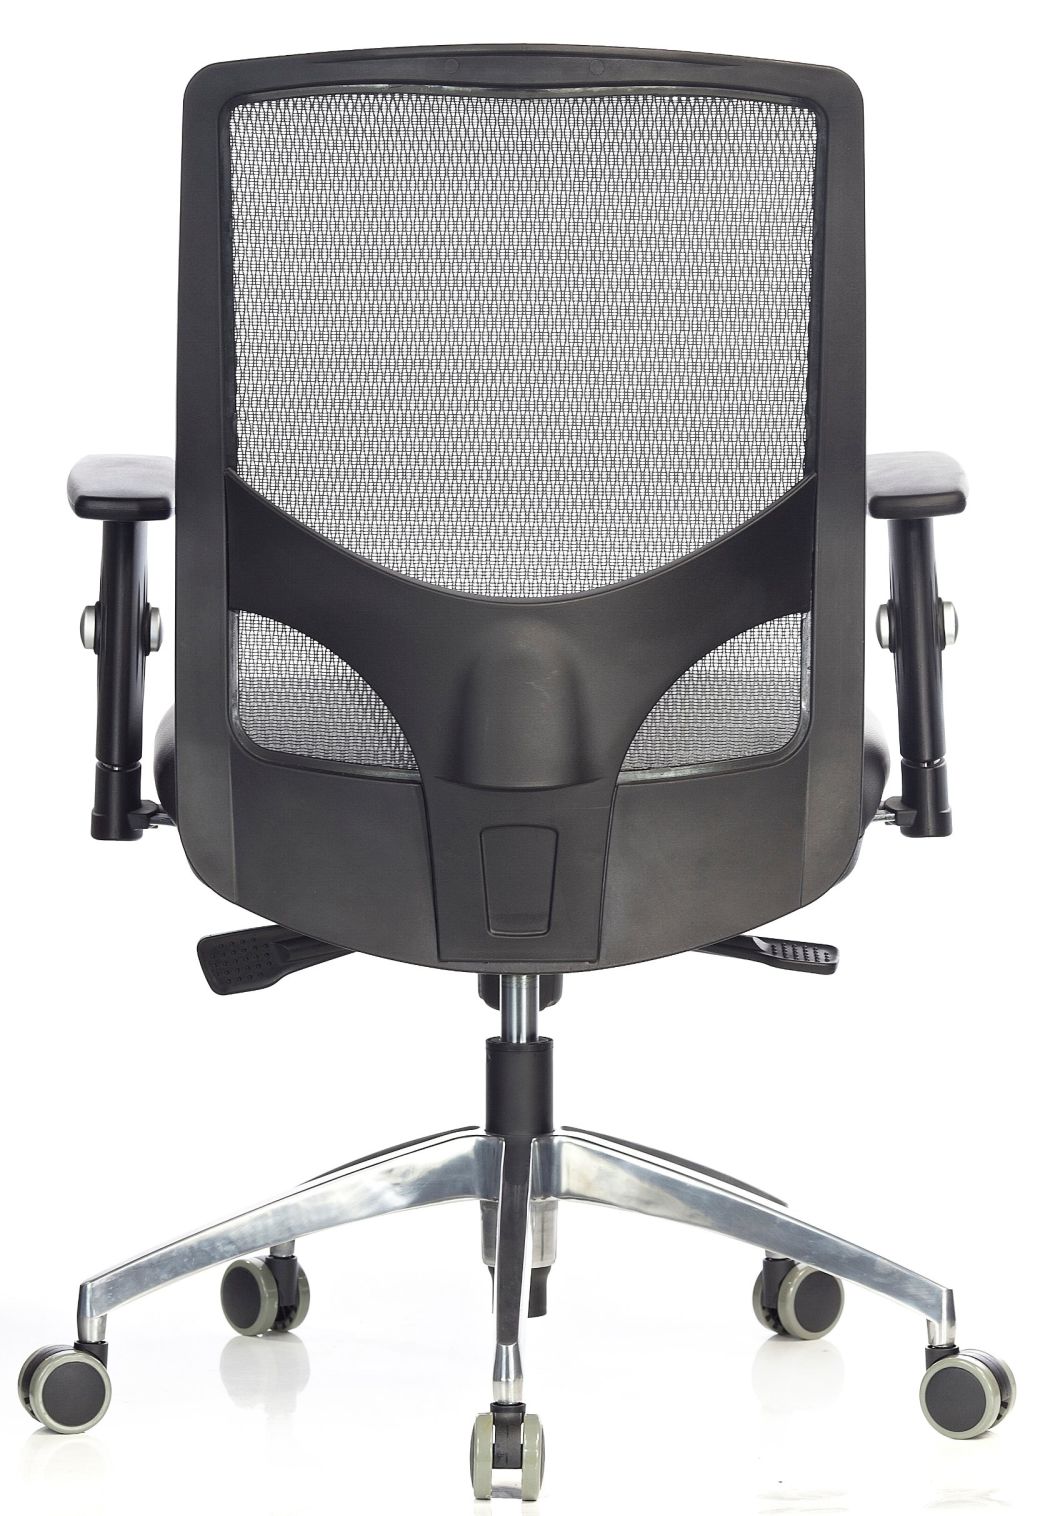 Furniture Mesh and Leather Executive Office Computer Chair